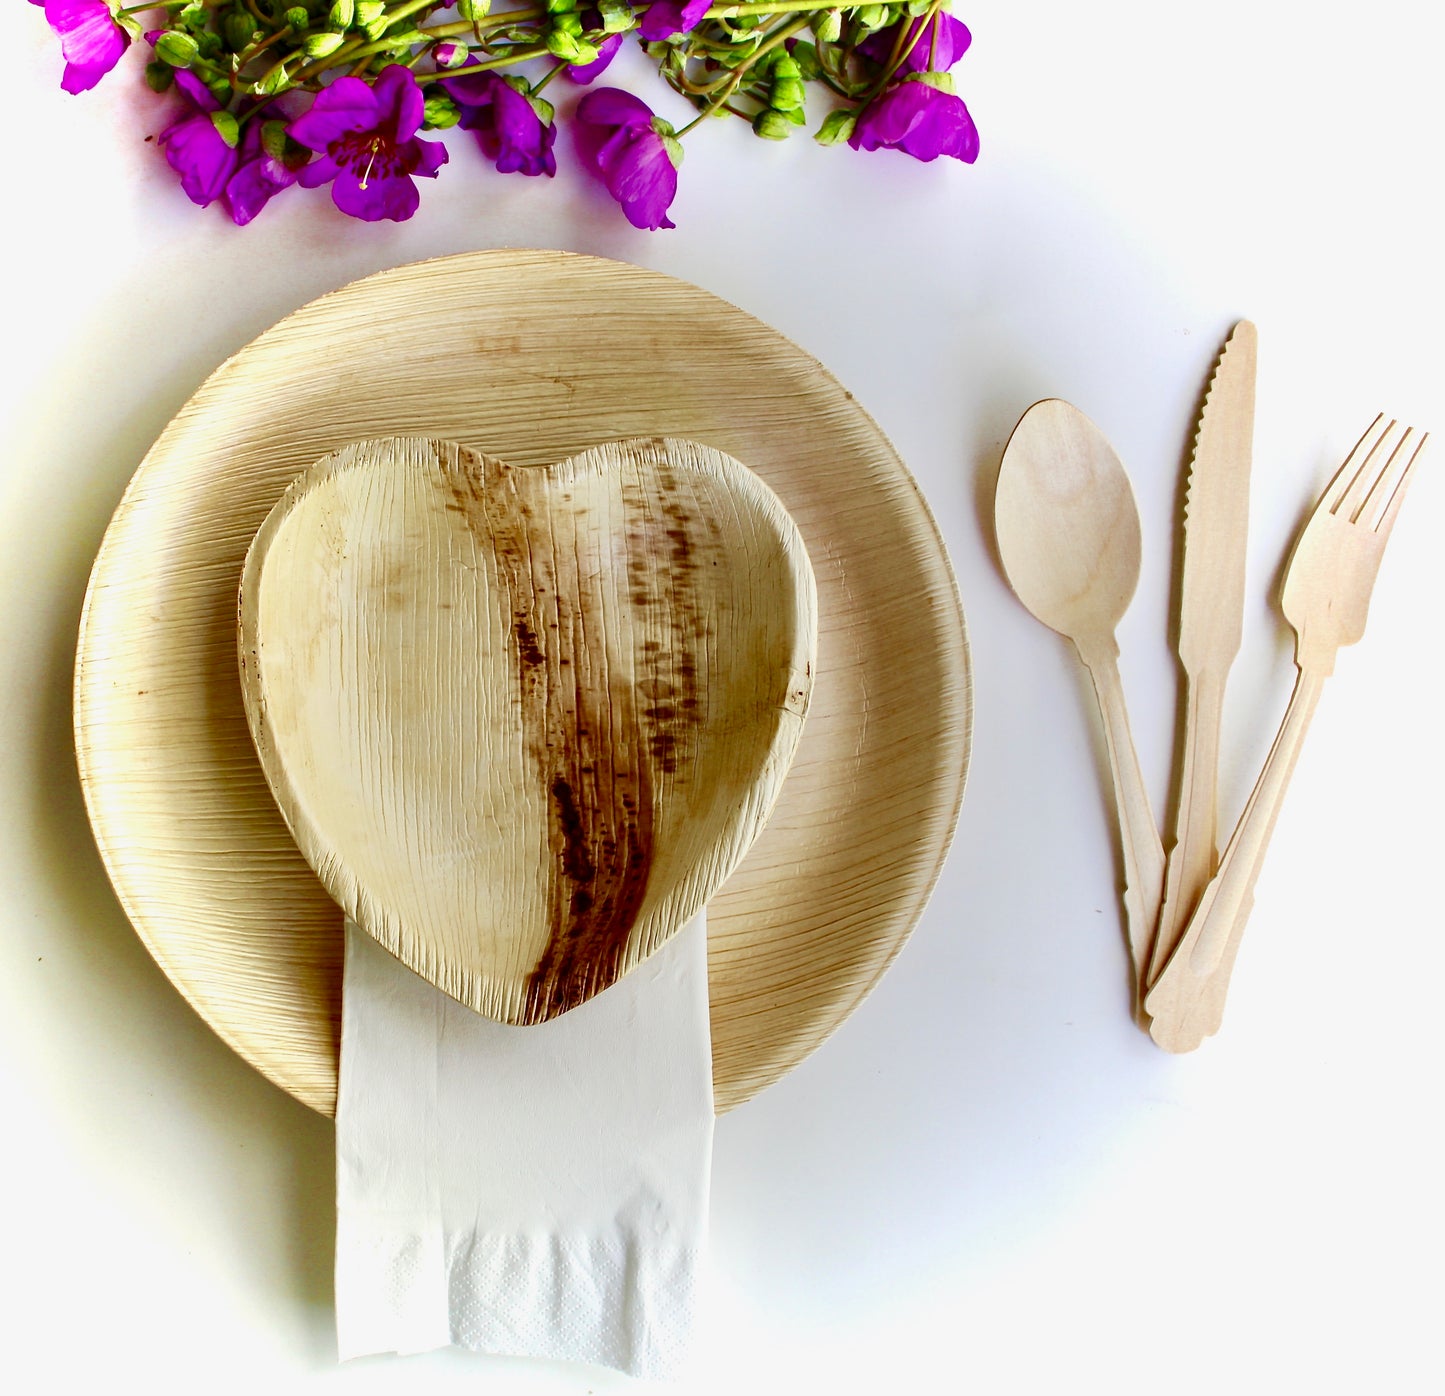 Bamboo Type palm leaf plate 10 pic 10" Round - 10 pic Haret- 30 pic Utensils 30 pic napkin